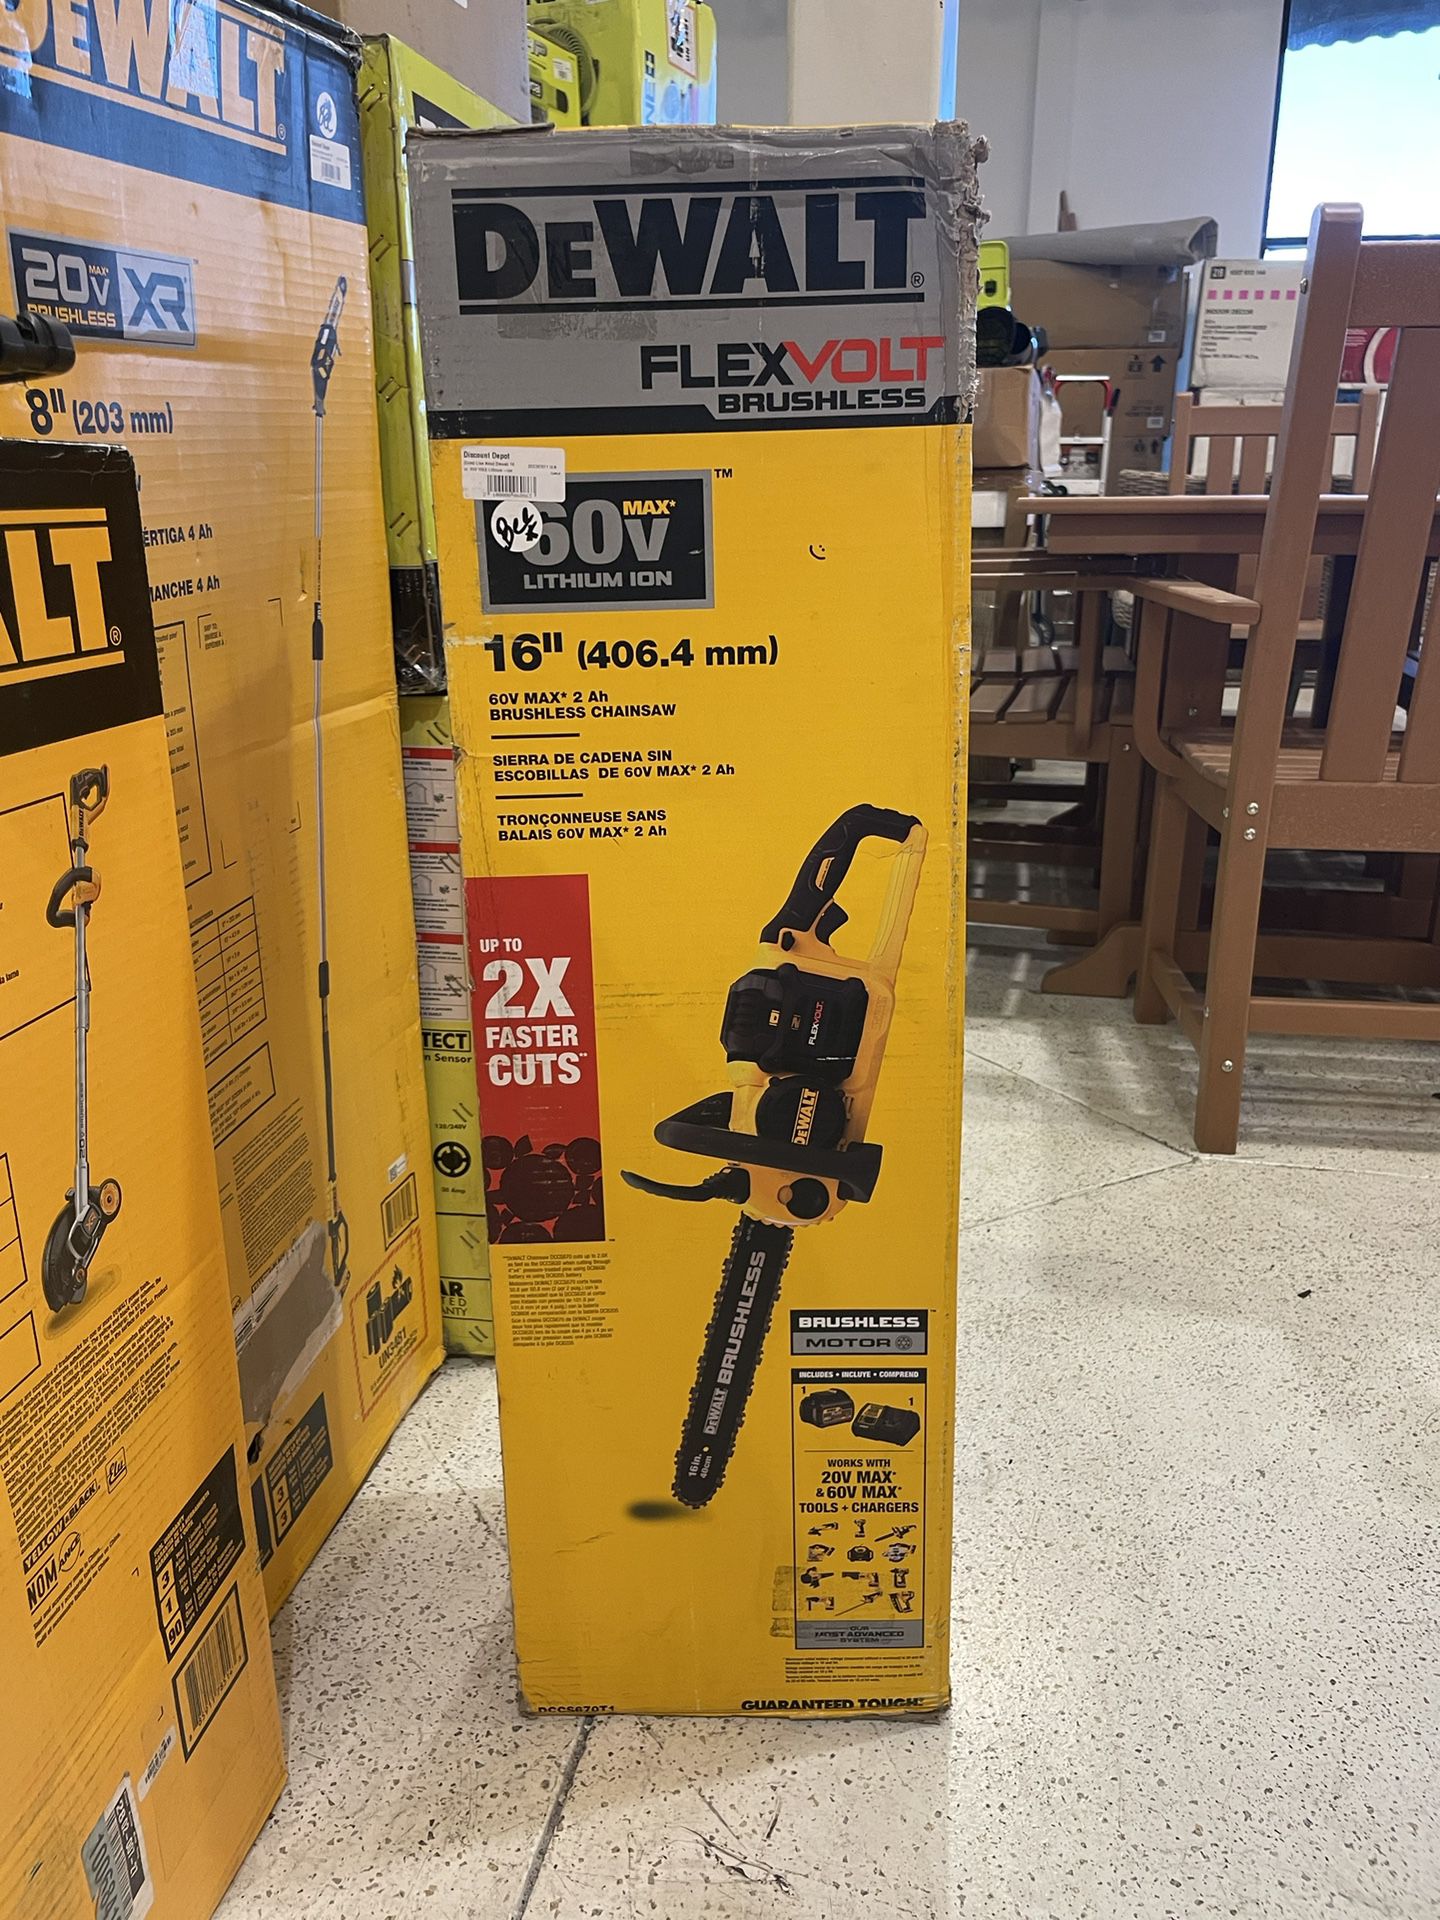 DEWALT 16 in. 60V MAX CORDLESS FLEXVOLT BRUSHLESS CHAINSAW KIT (BATTERY AND CHARGER INCLUDED) 